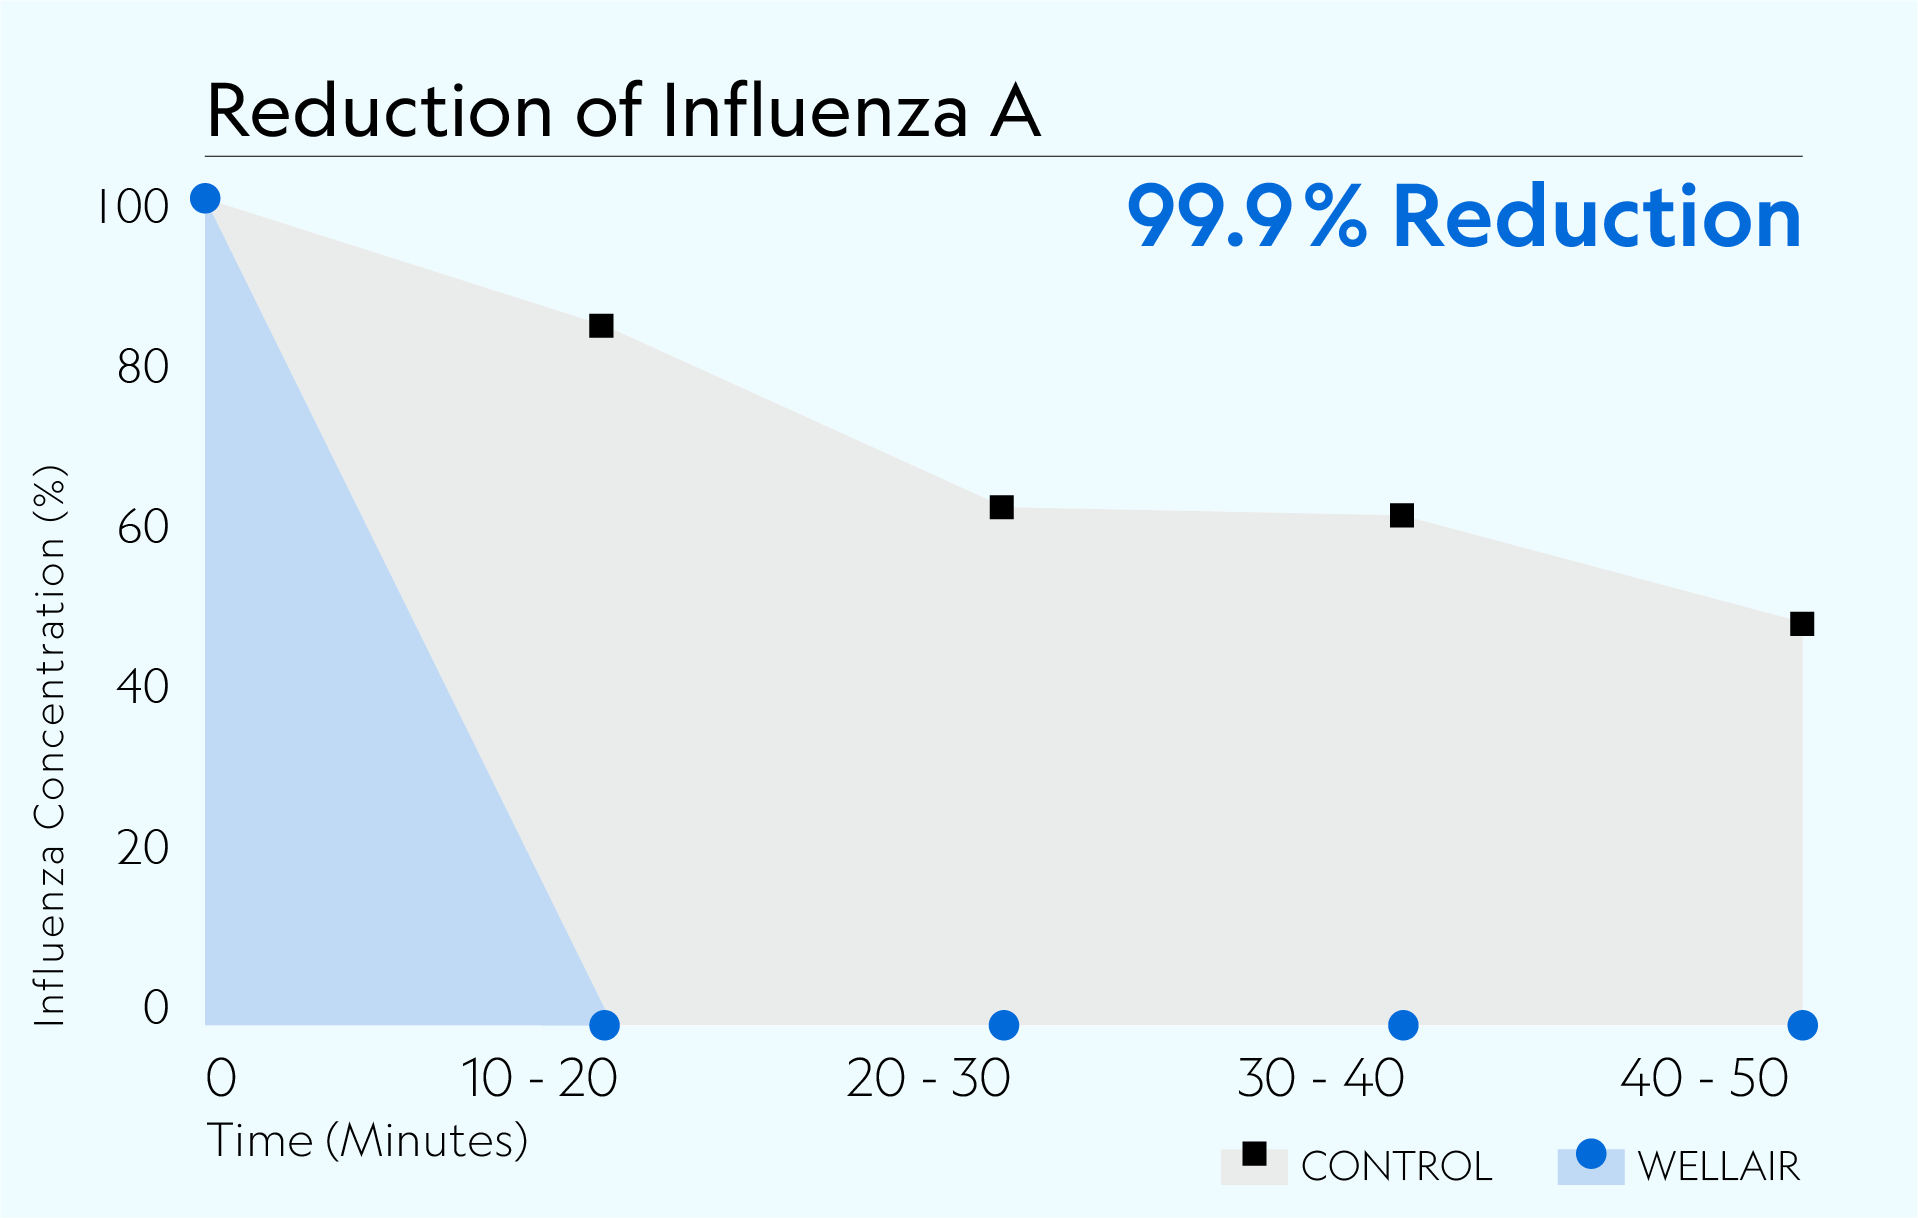 Defend 1050 achieved 99.9% reduction of Influenza A